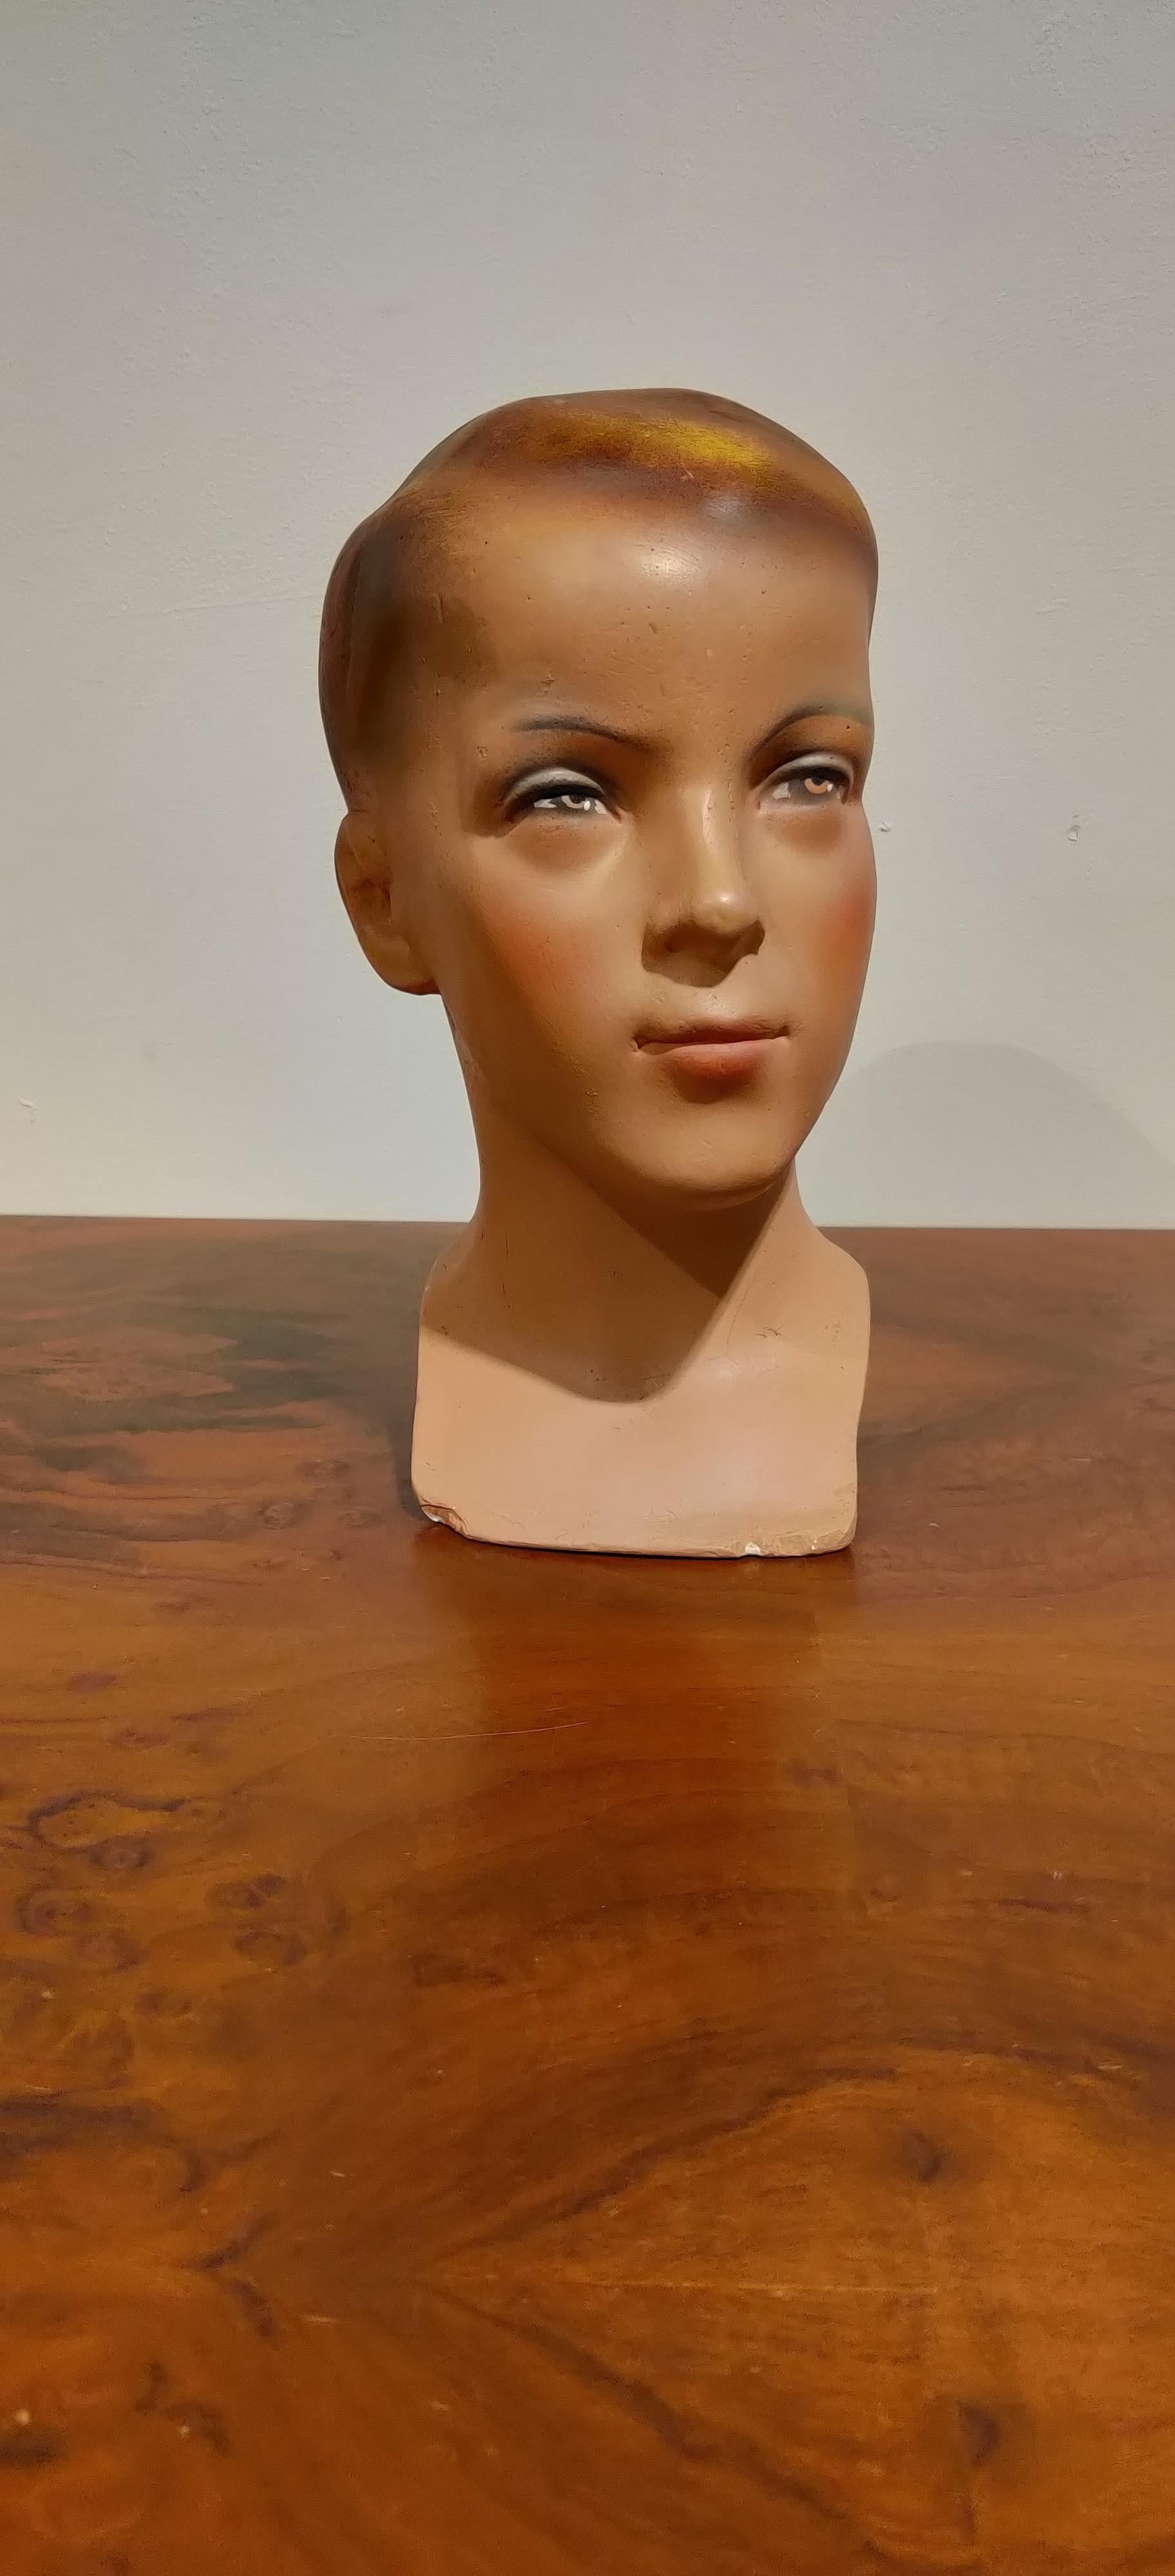 Beautiful child mannequin head made from plaster. 

It has some minor user traces.

Comes from a lot acquired from a clothes shop that stopped activities.

Great decorative item to display glasses, hats,..

France - 1960s

Measure: Height